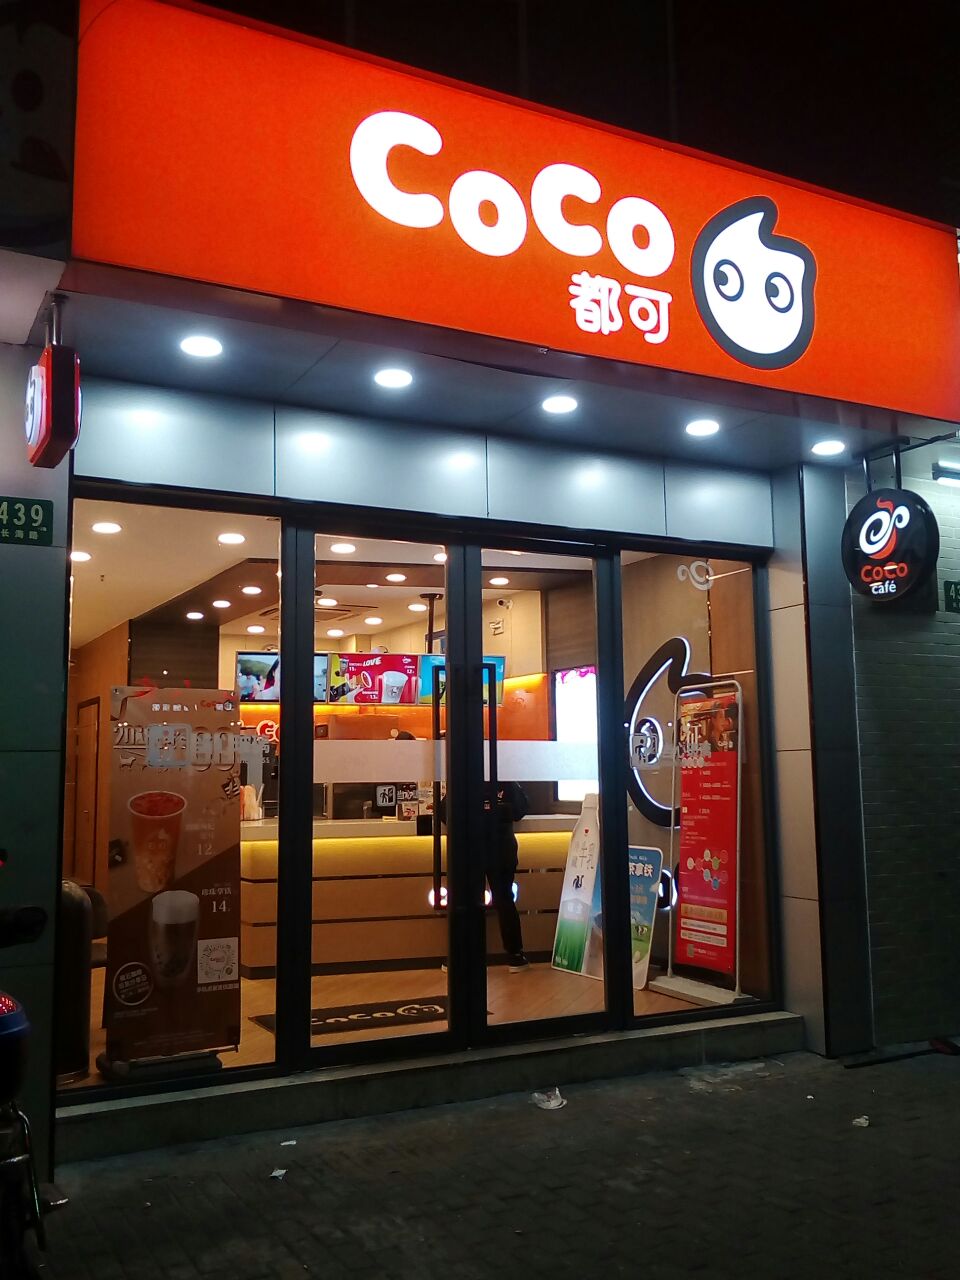 Coco门头图片